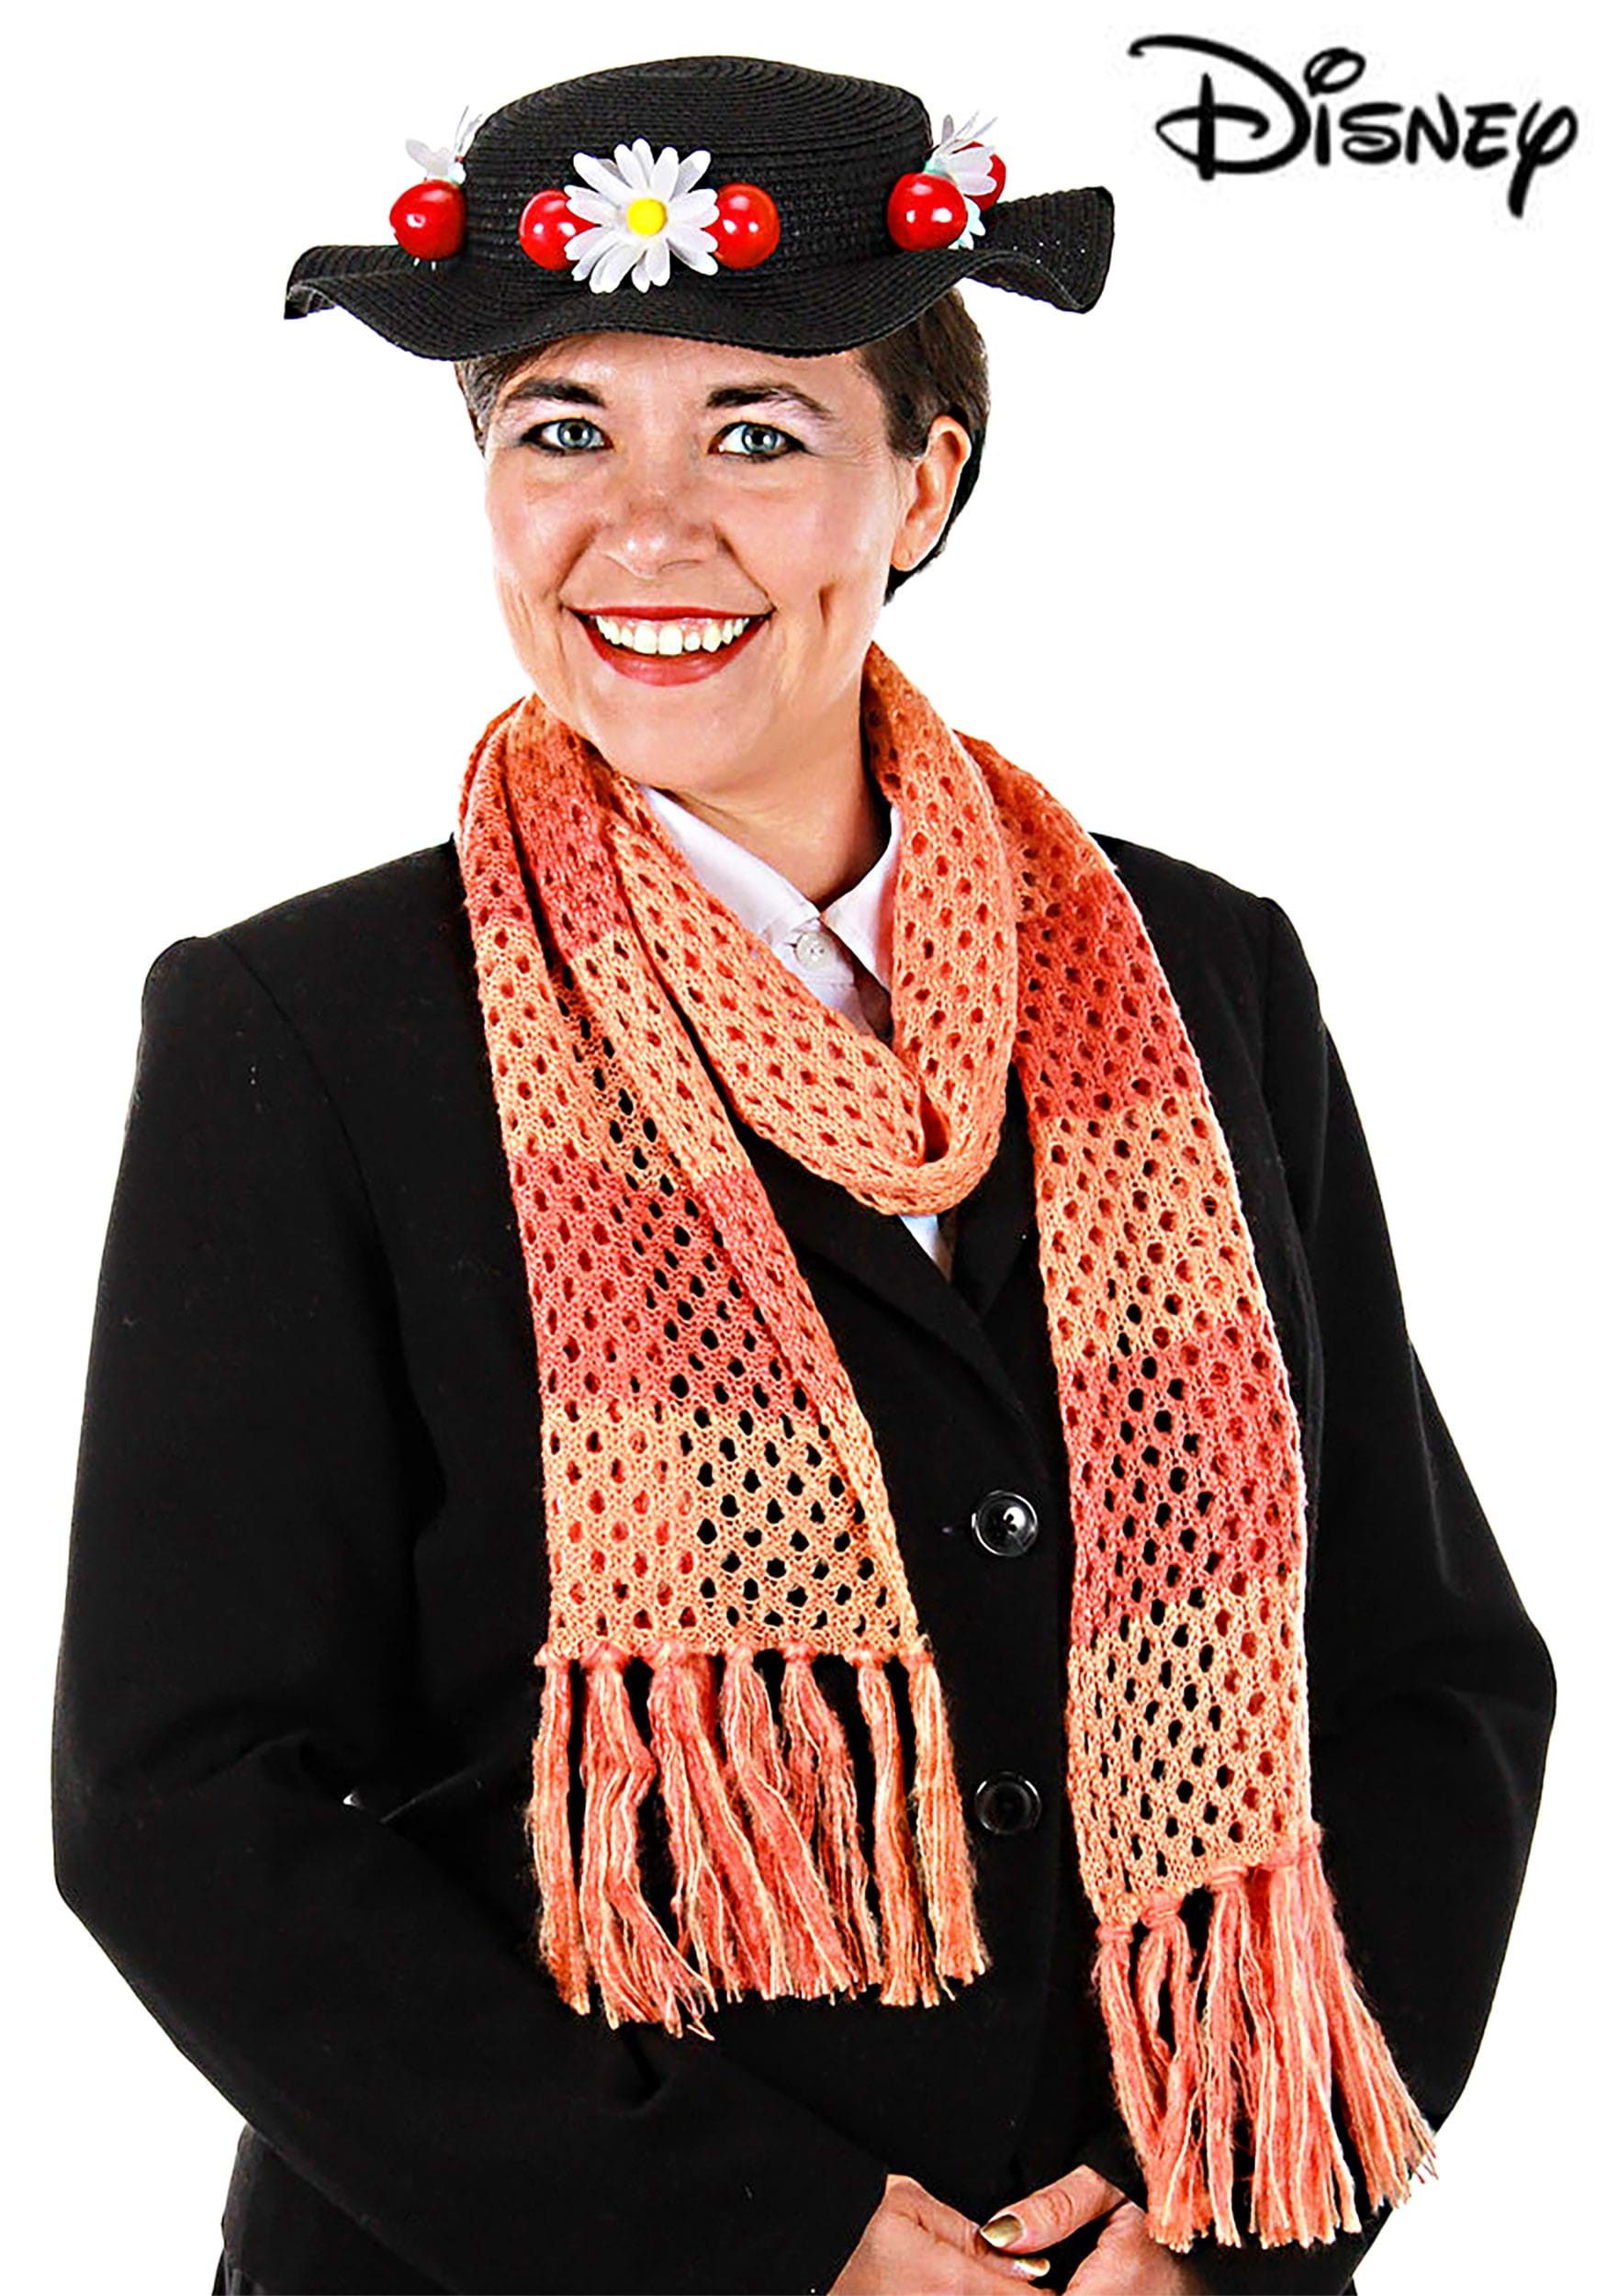 https://images.halloweencostumes.com/products/58955/1-1/disney-mary-poppins-classic-black-costume-hat-and-scarf-set-.jpg